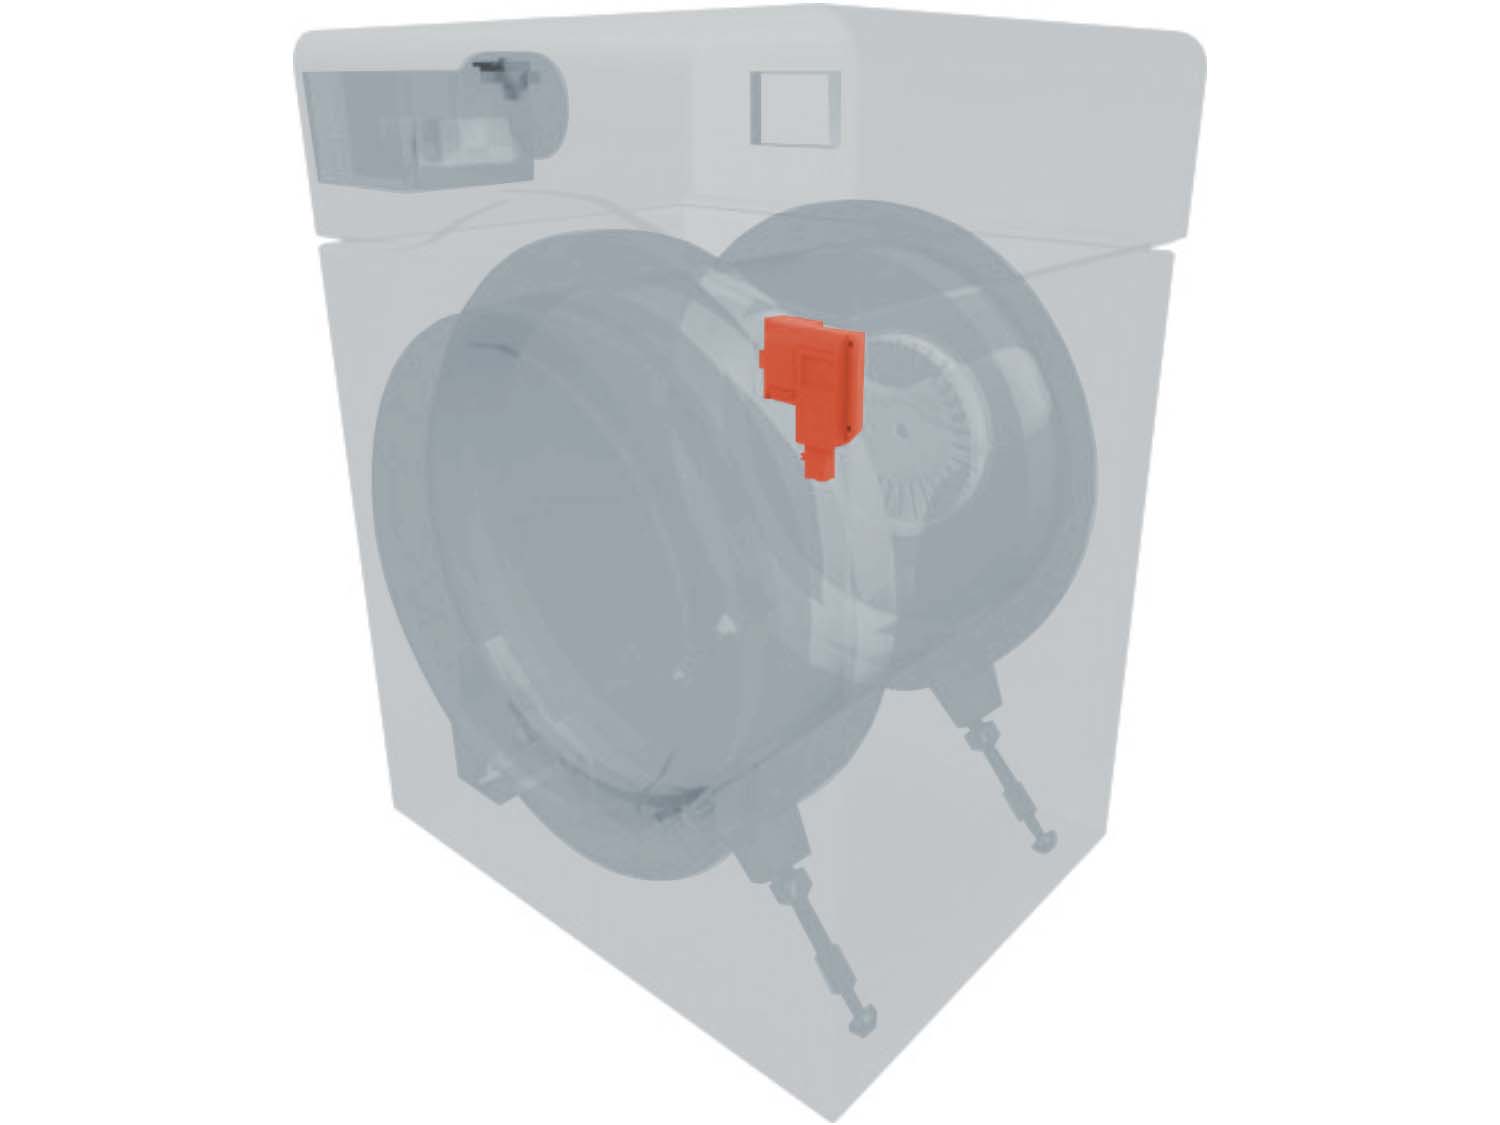 A 3D diagram showing the components of a washer and specifying the location of the door lock switch